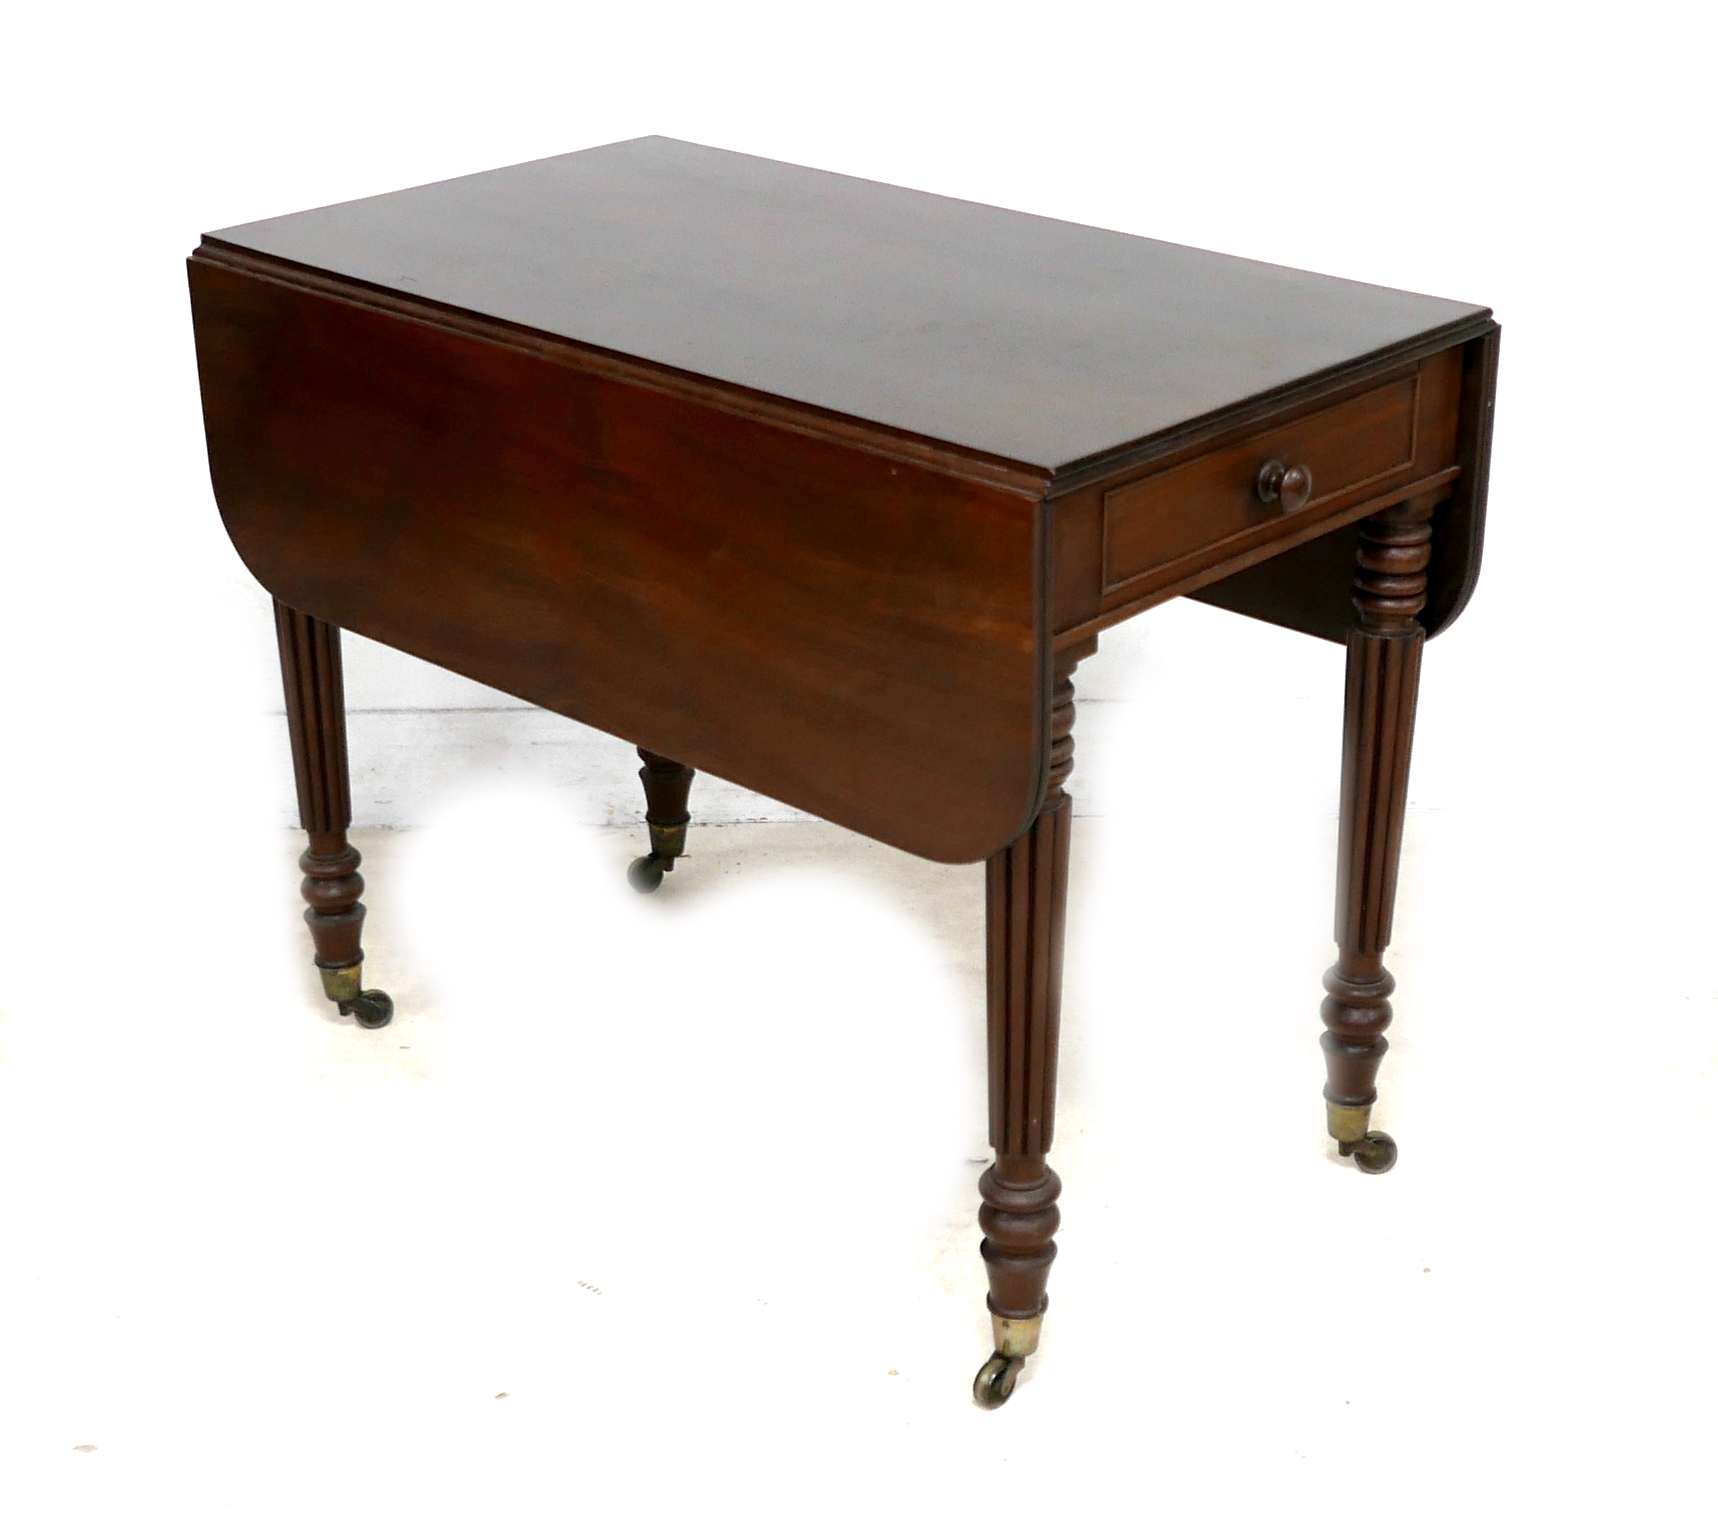 An early Victorian mahogany Pembroke table, with drop leaves, single drawer, turned and reeded